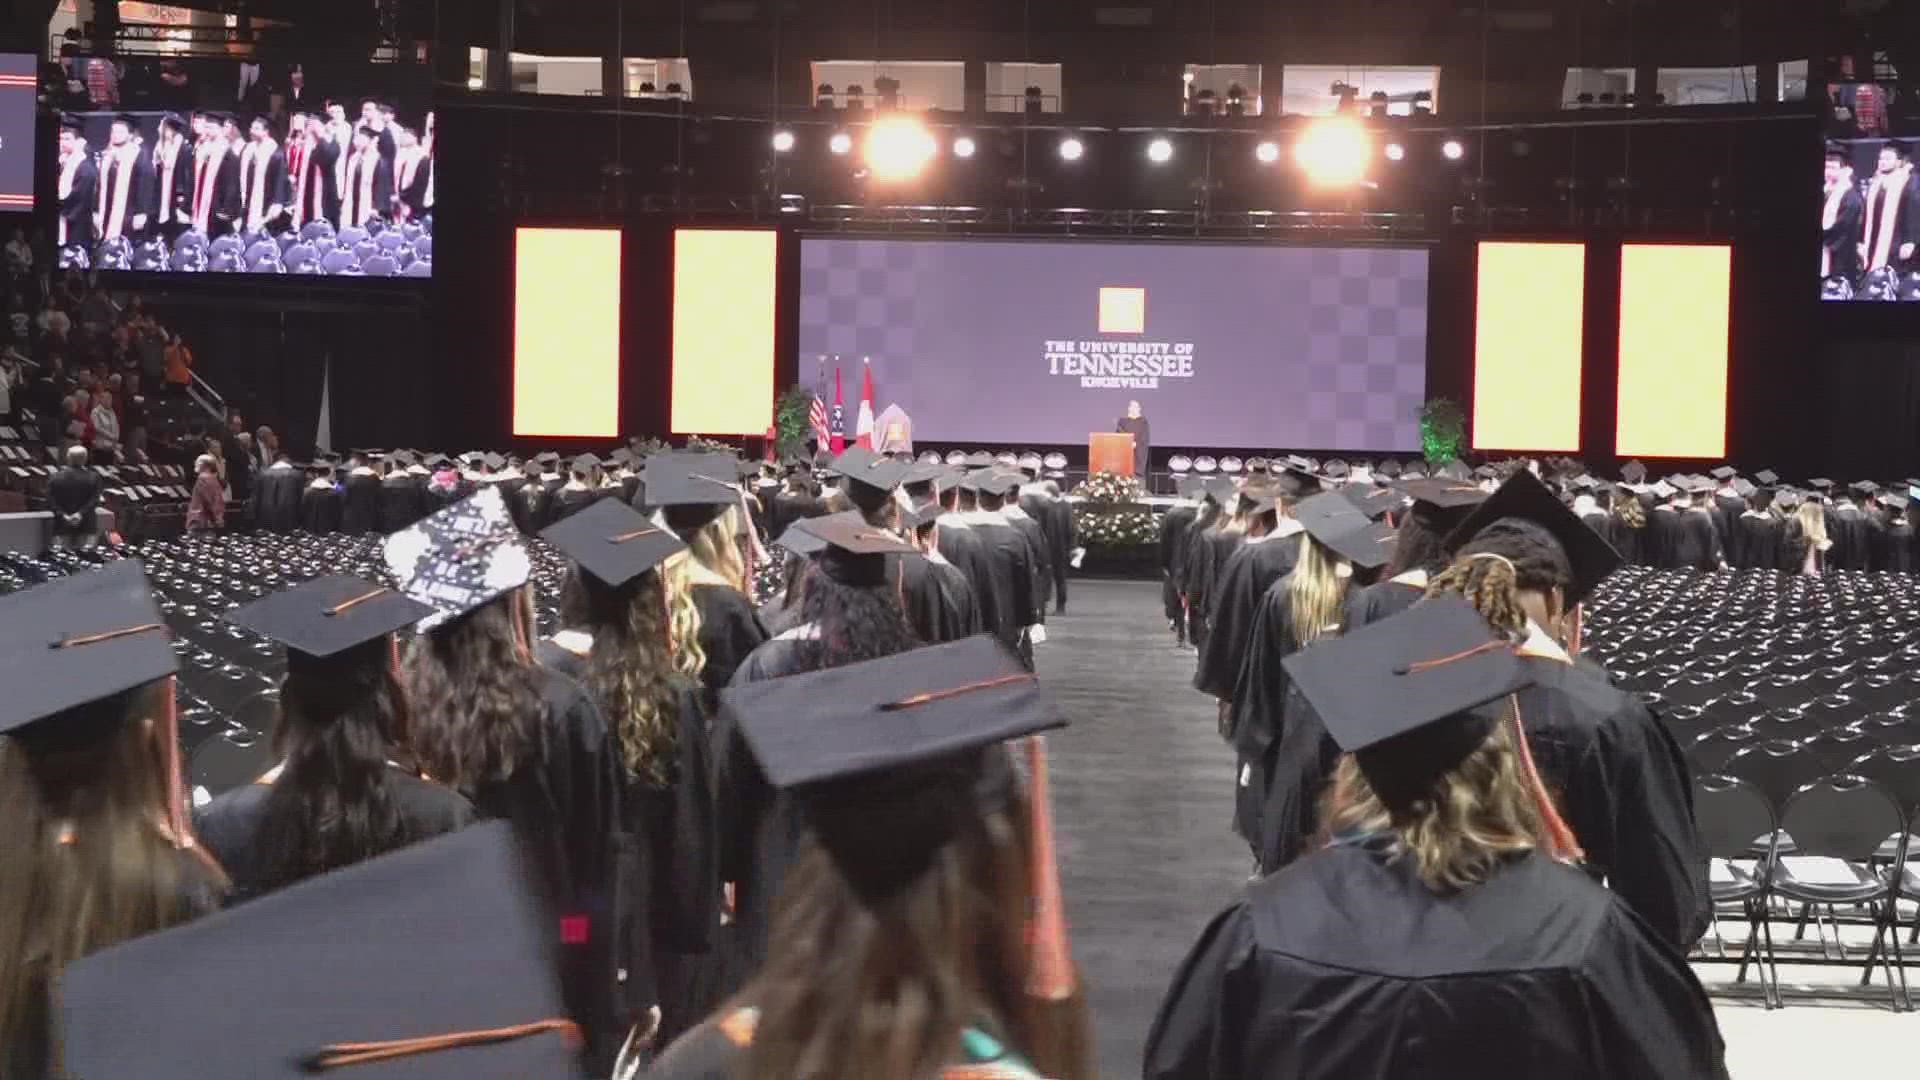 Thousands of UT students threw up their caps in gowns to celebrate graduation!